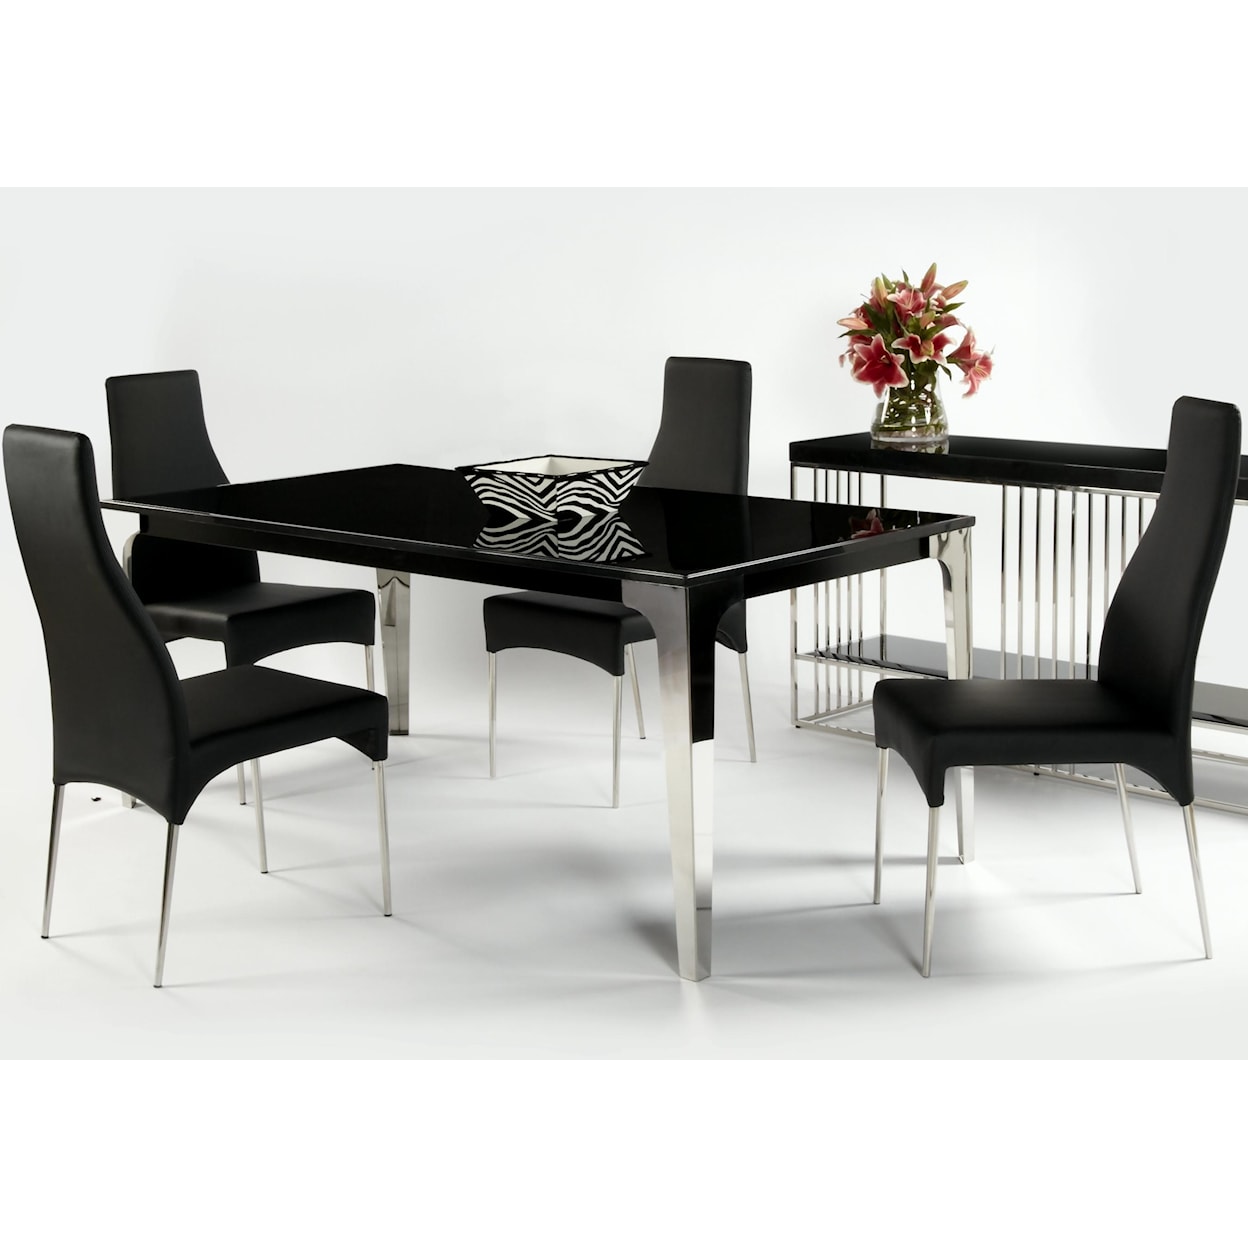 Chintaly Imports Crystal 5 Piece Dining Set